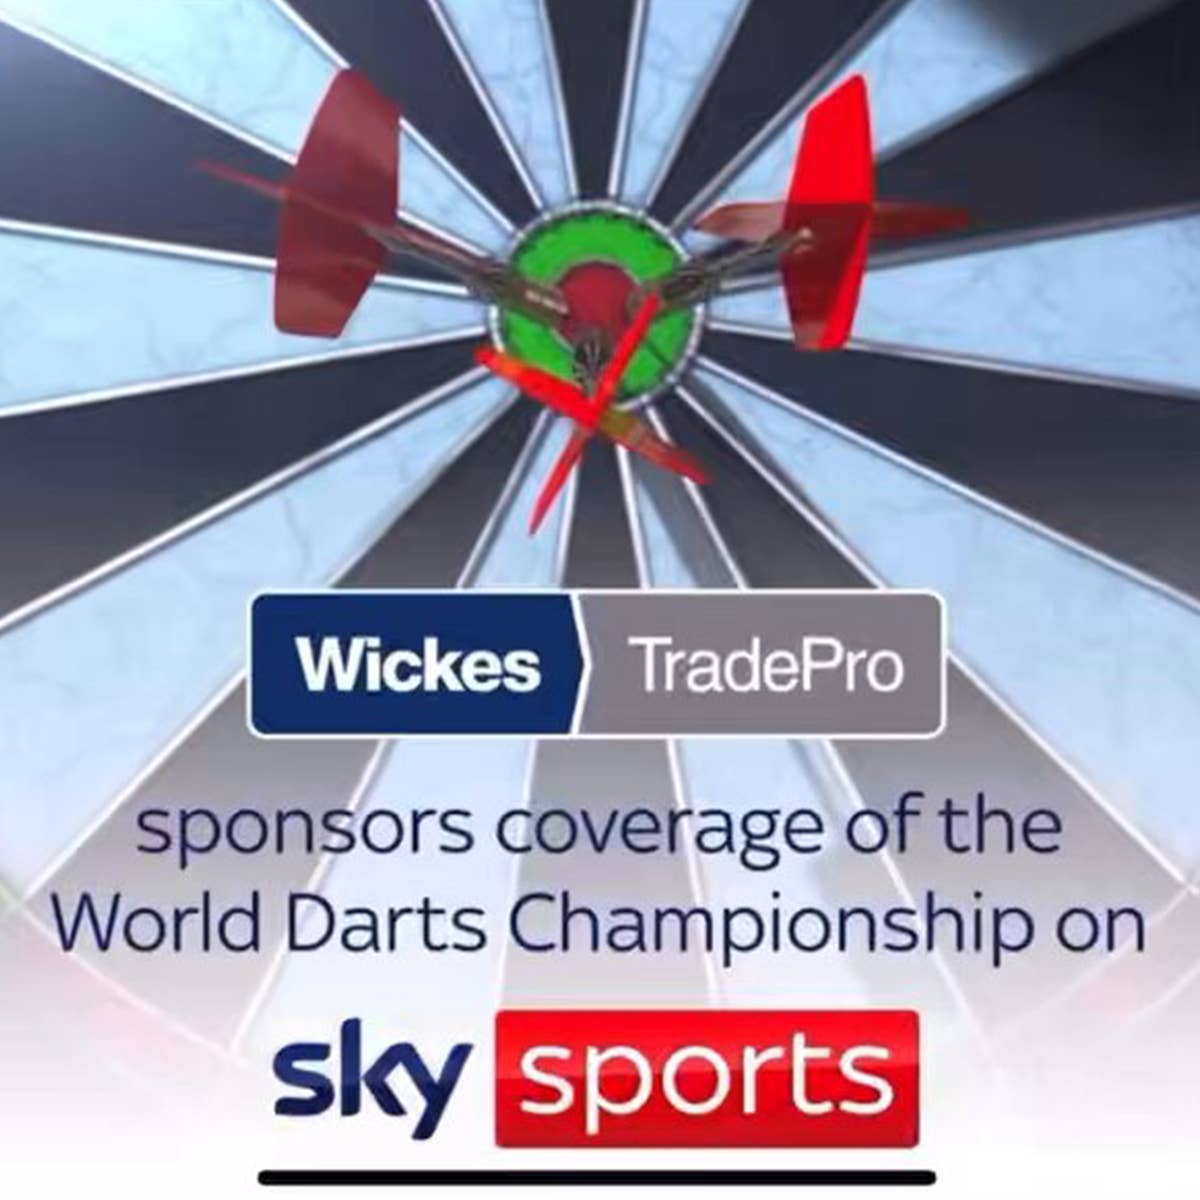 World Darts Championship scores fresh audiences for Sky and its sponsors